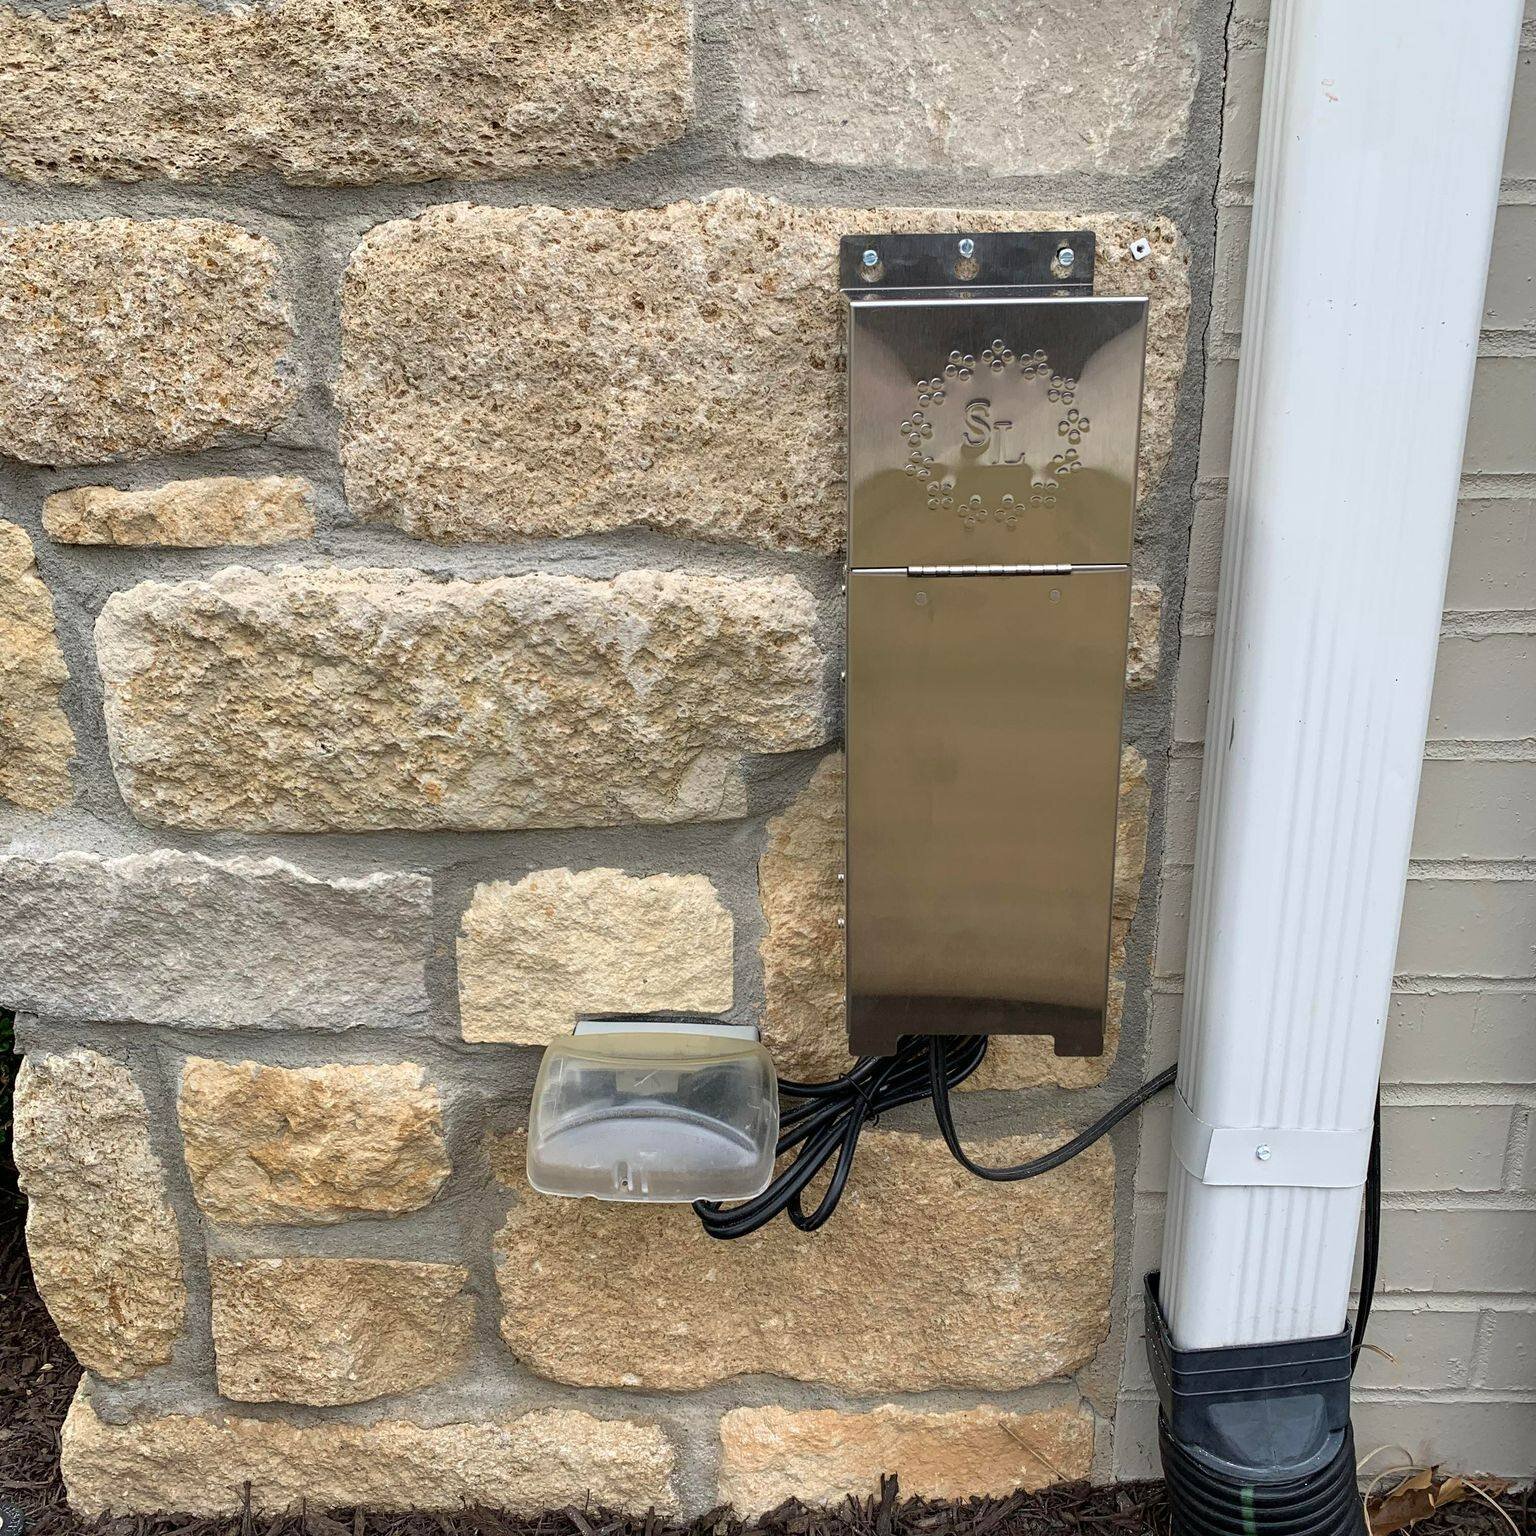 ⚡️𝗣𝗼𝘄𝗲𝗿 𝗦𝗼𝘂𝗿𝗰𝗲!⚡️

During a recent installation we replaced an old plastic transformer with a new aluminum plated Sterling lighting transformer. 

Transformers power the entire lighting system, so it is important to use the best options fo